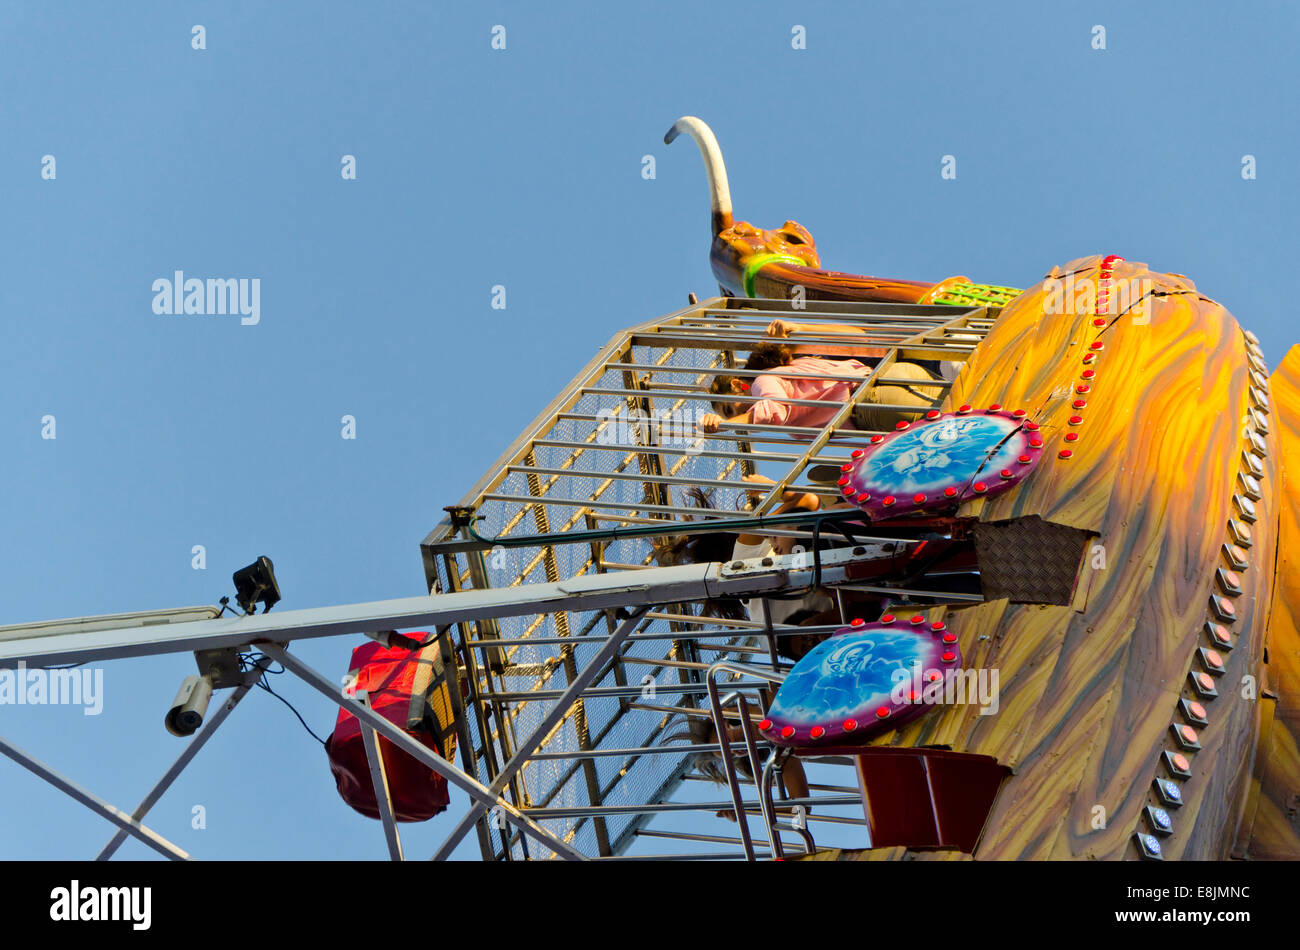 Children inside a cage of a pirate ship, amusement ride, gondola, in horizontal position at annual fair. Fuengirola, Spain. Stock Photo